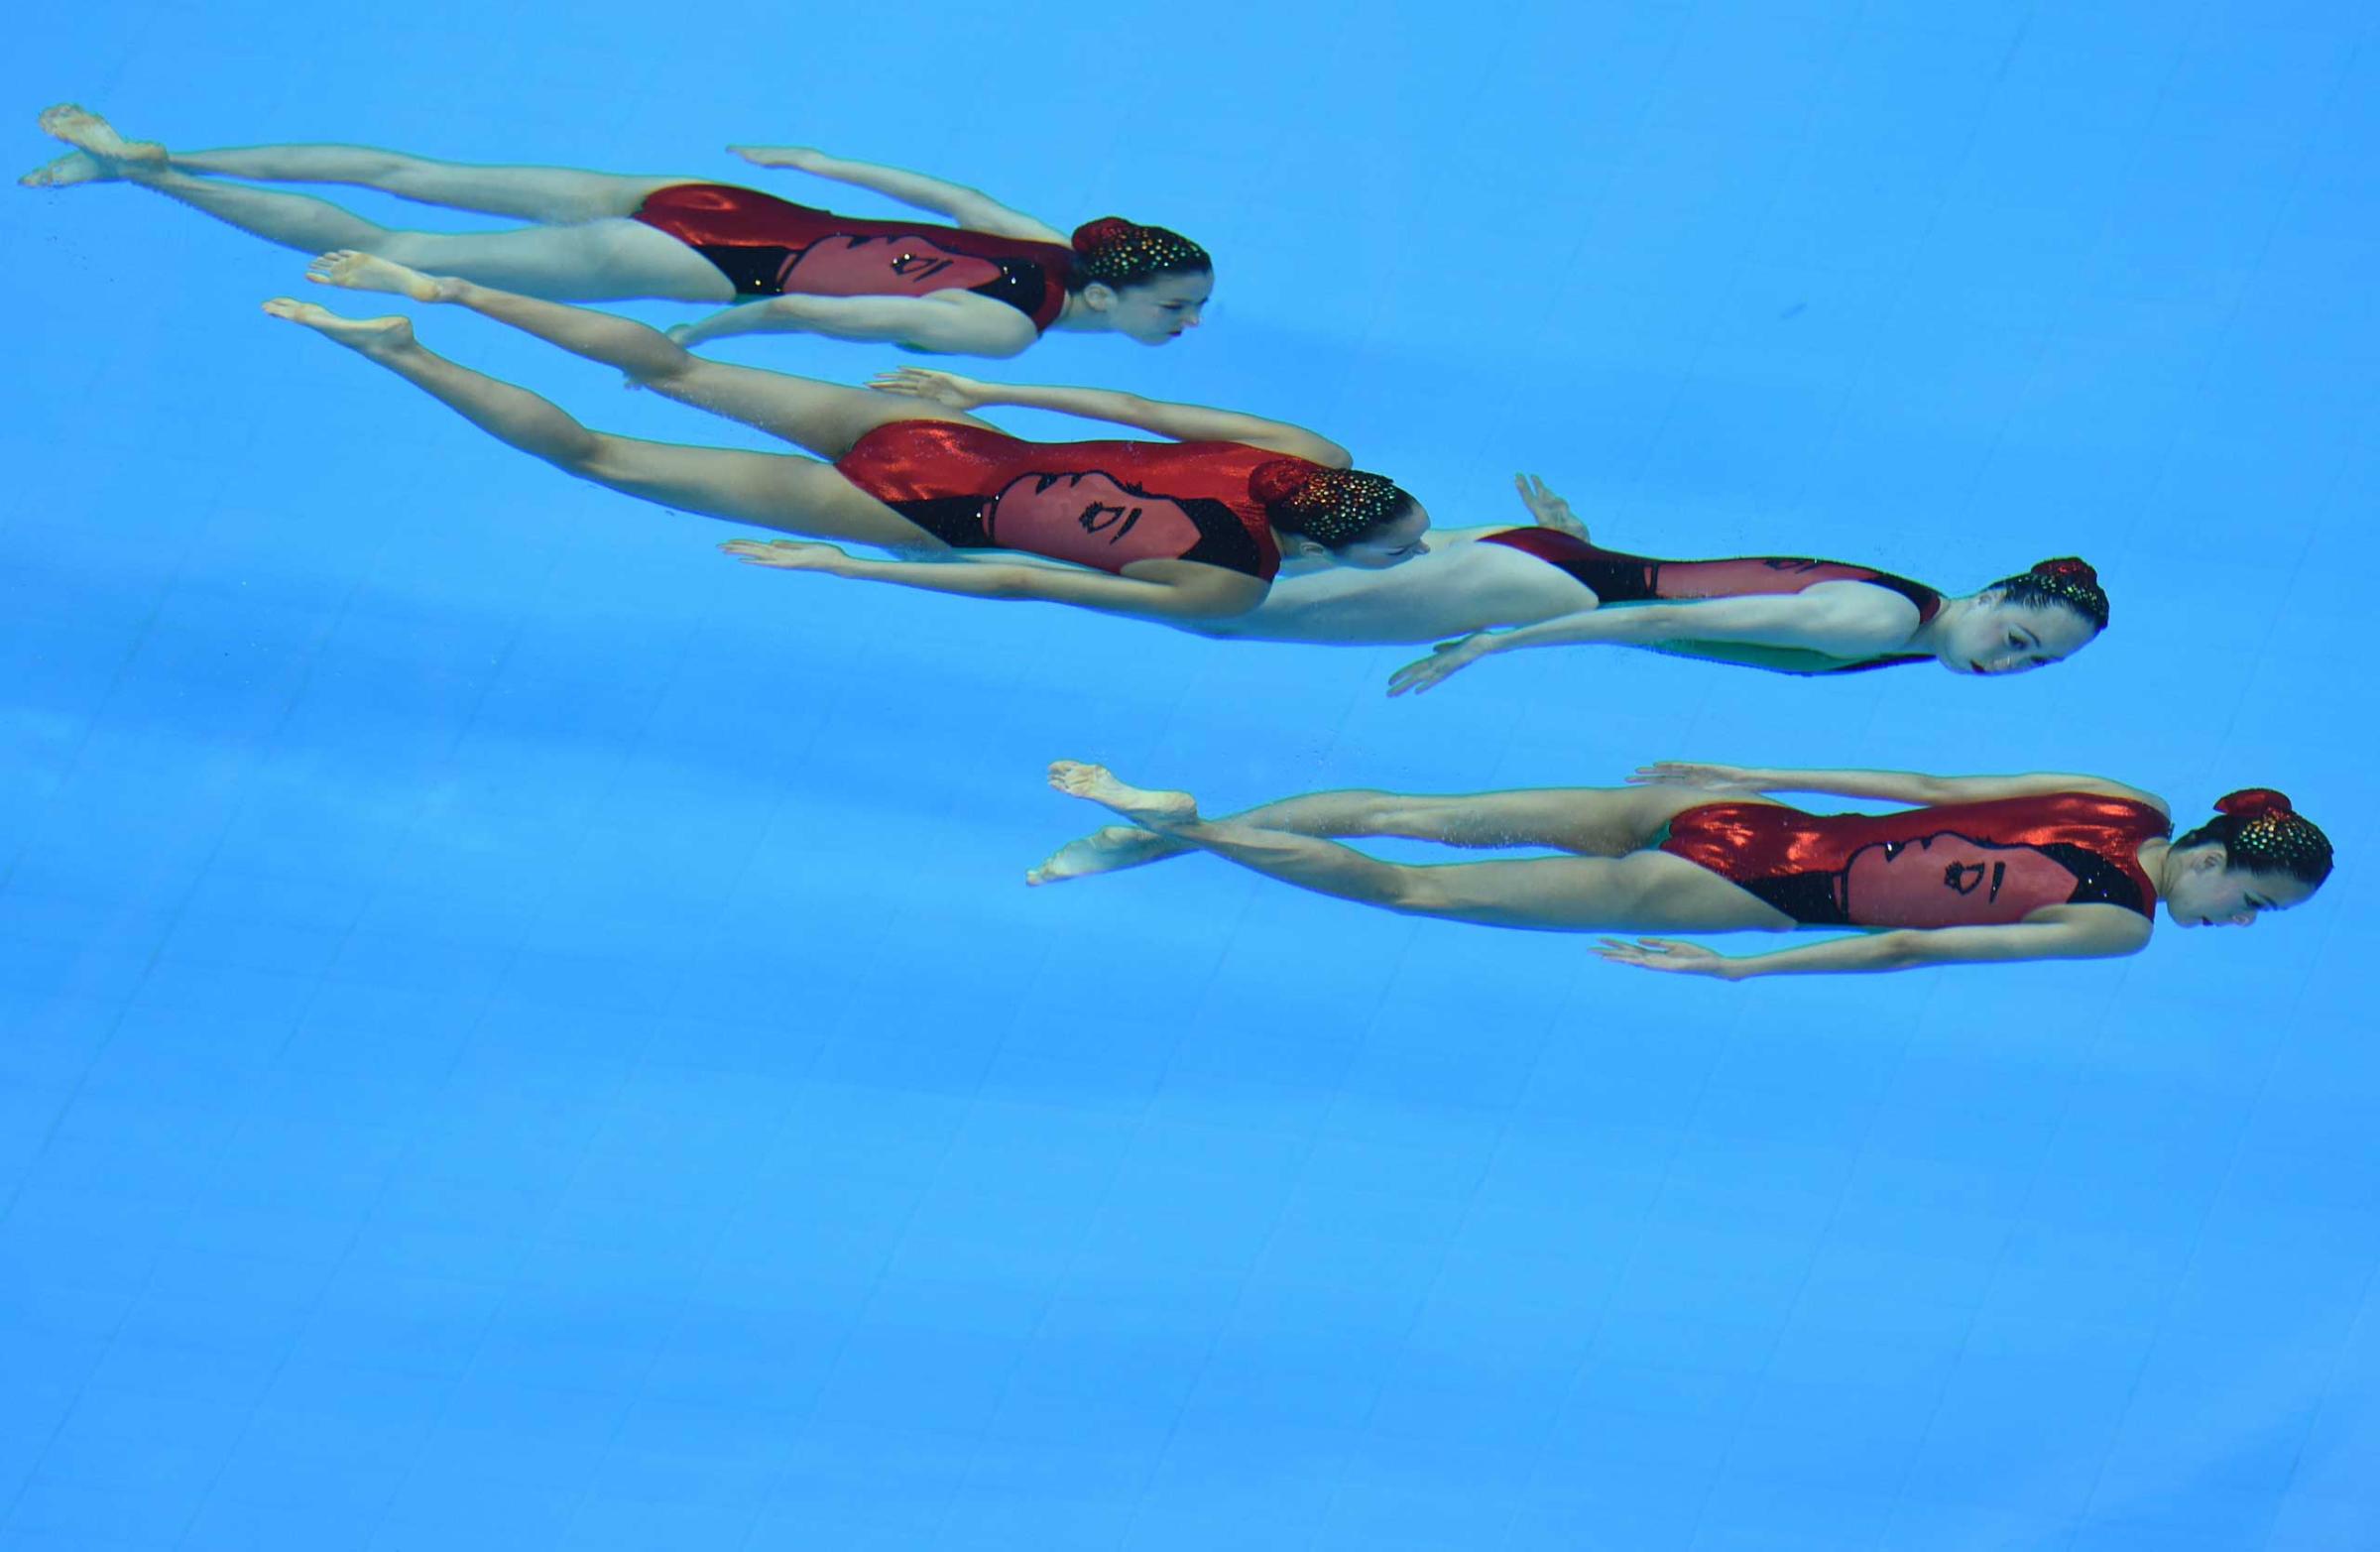 Japan's swimmers compete in the free combination synchronised swimming event final during the 2014 Asian Games at the Munhak Park Tae-hwan Aquatics Centre in Incheon, Sept. 23, 2014.